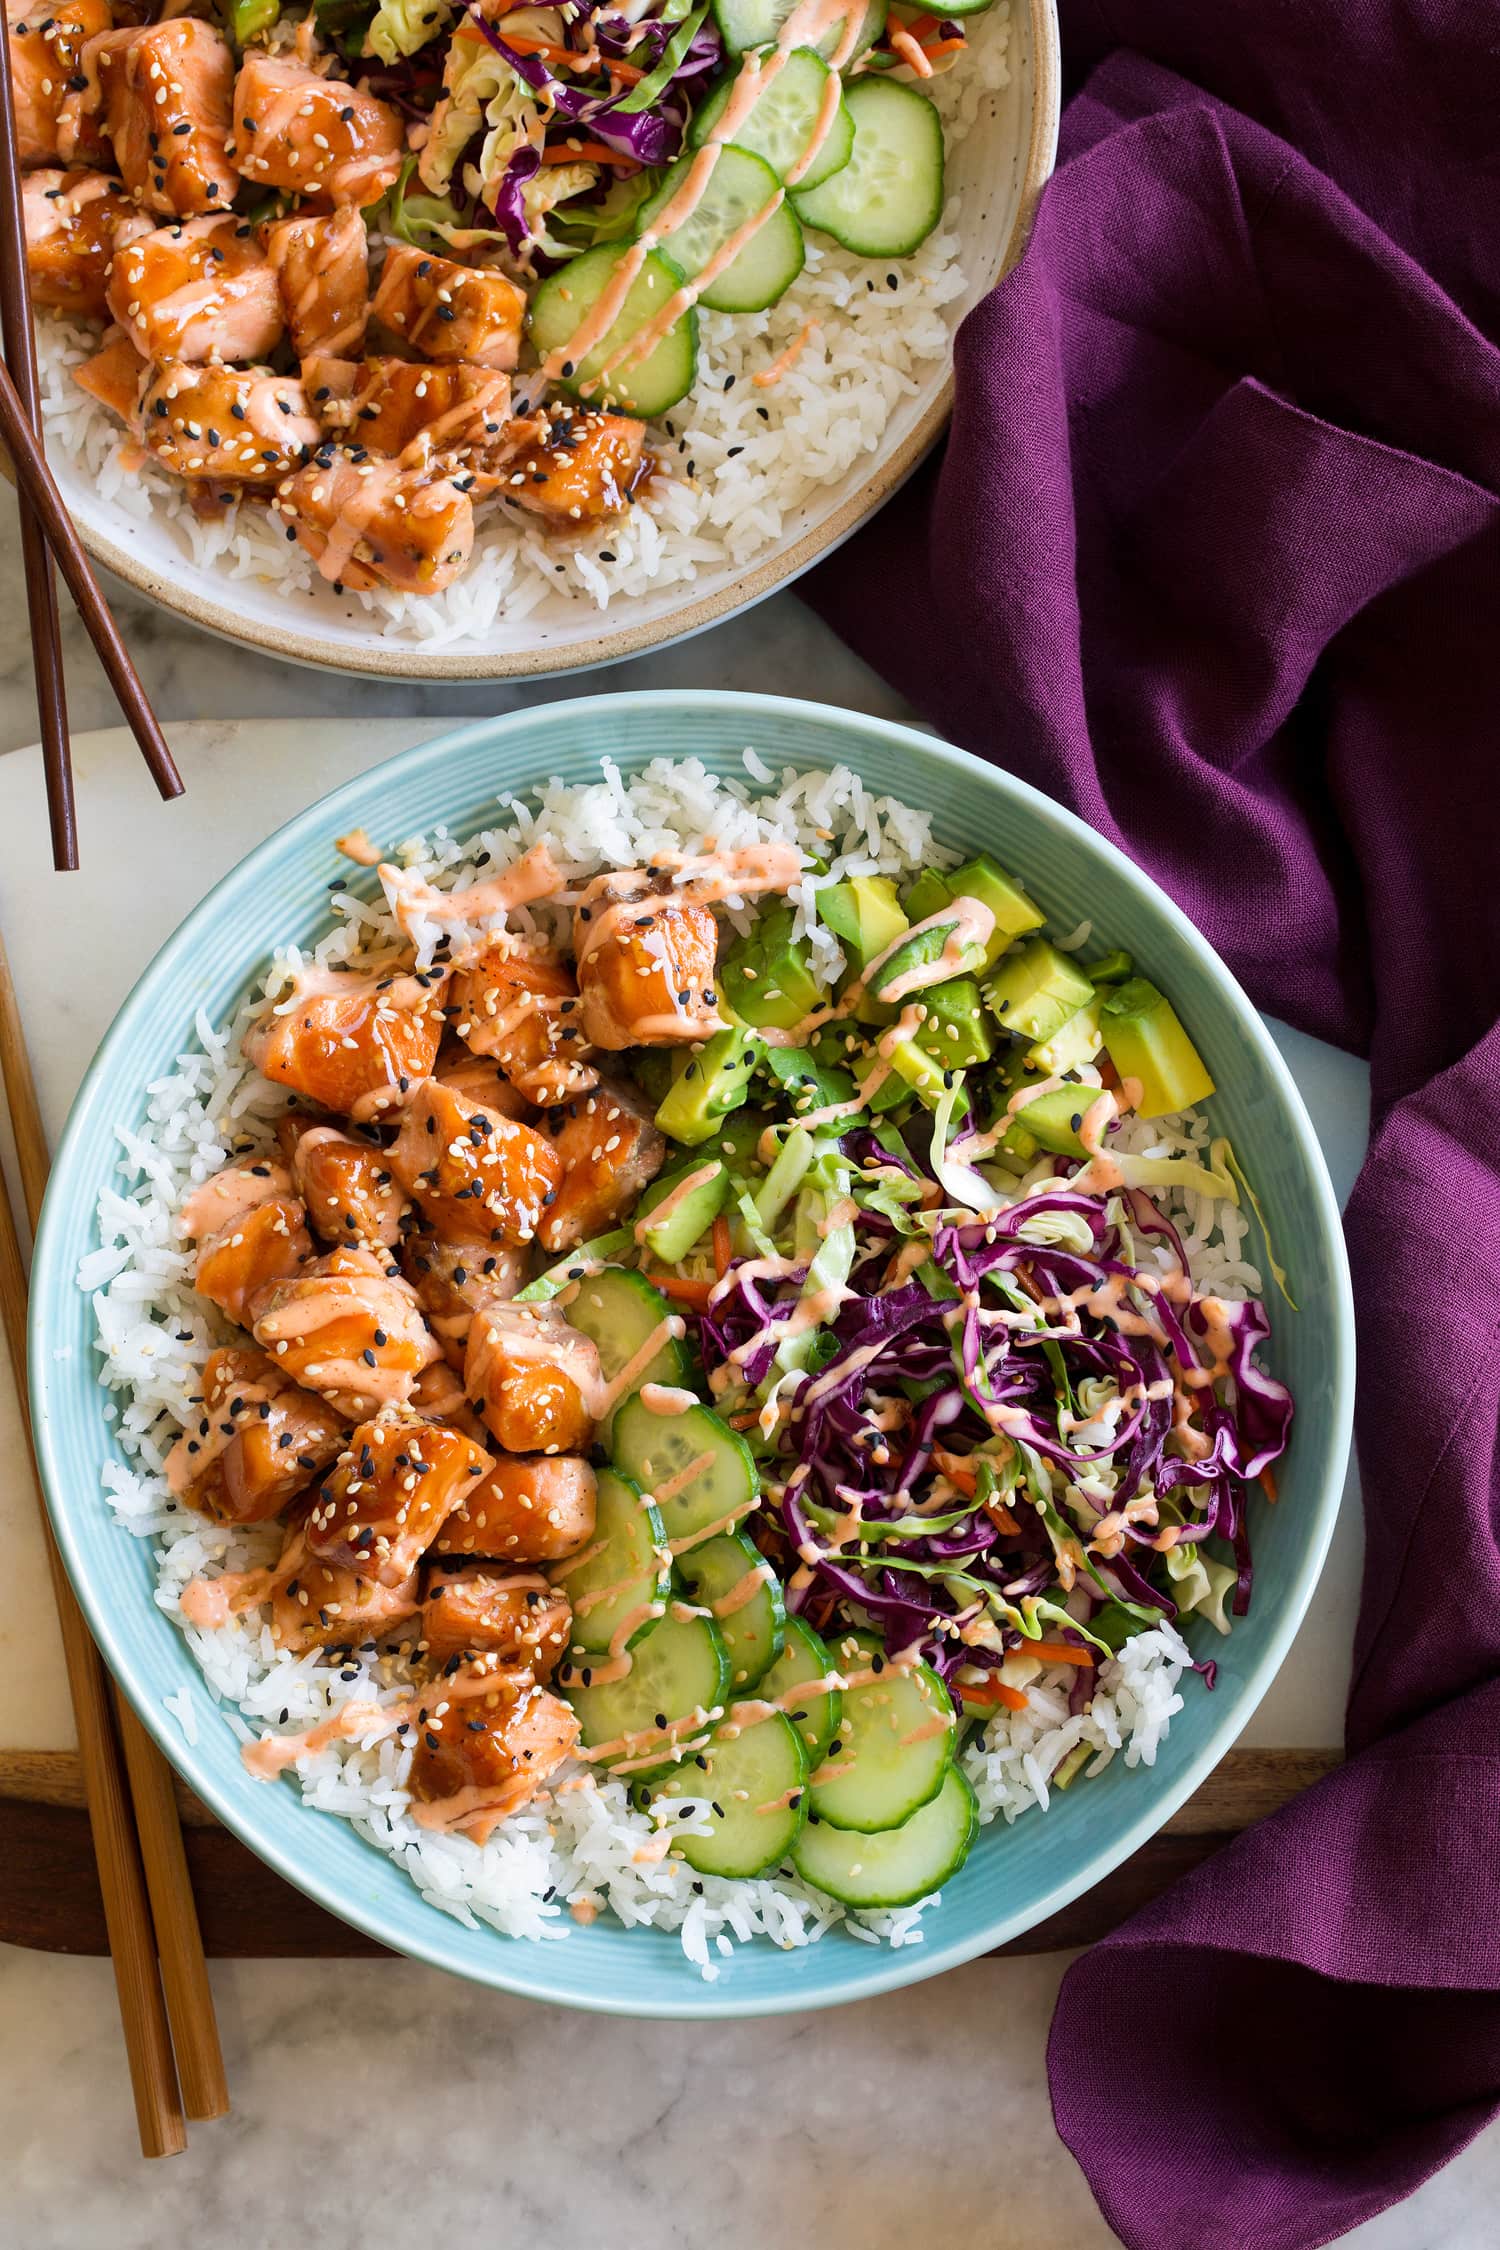 Layered into a blue bowl is white rice, glazed salmon, cucumber, asian cabbage slaw, avocado, and sesame seeds.